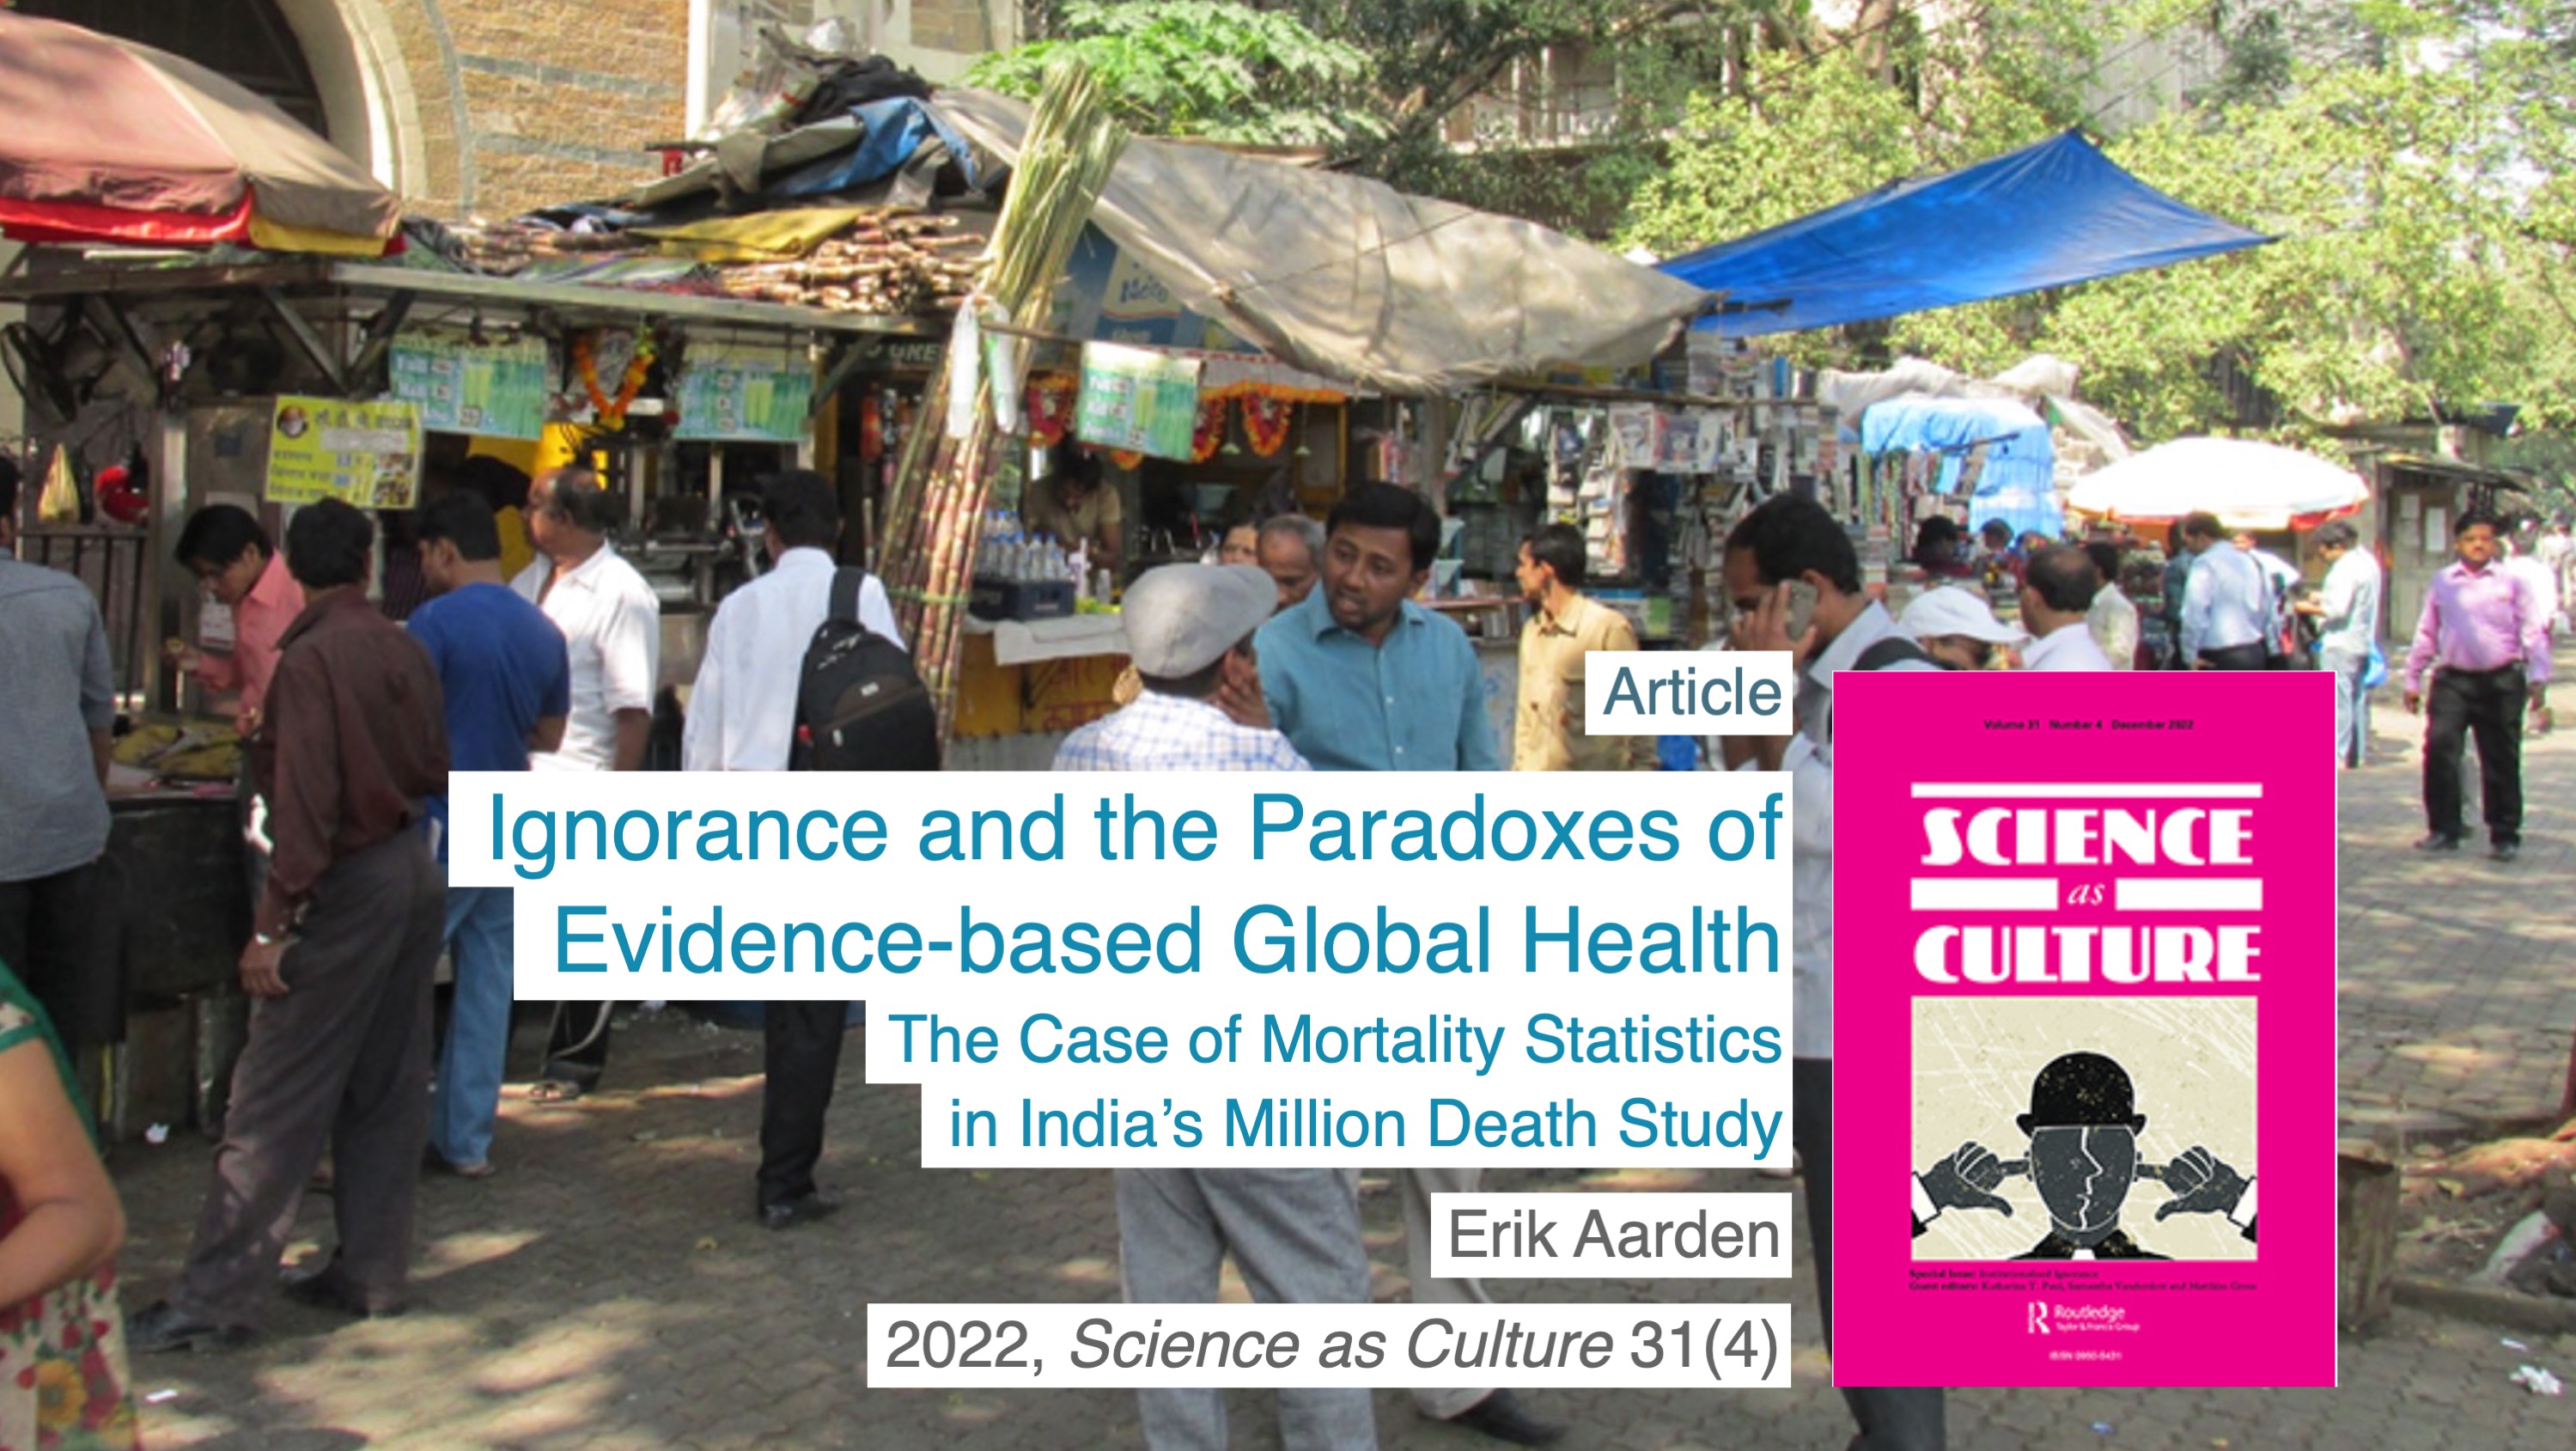 Erik Aarden: Ignorance and the Paradoxe of Evidence-based Global Health. The Case of Mortality Statistics in India's Million Death Study. 2022, Science as Culture 31(4).